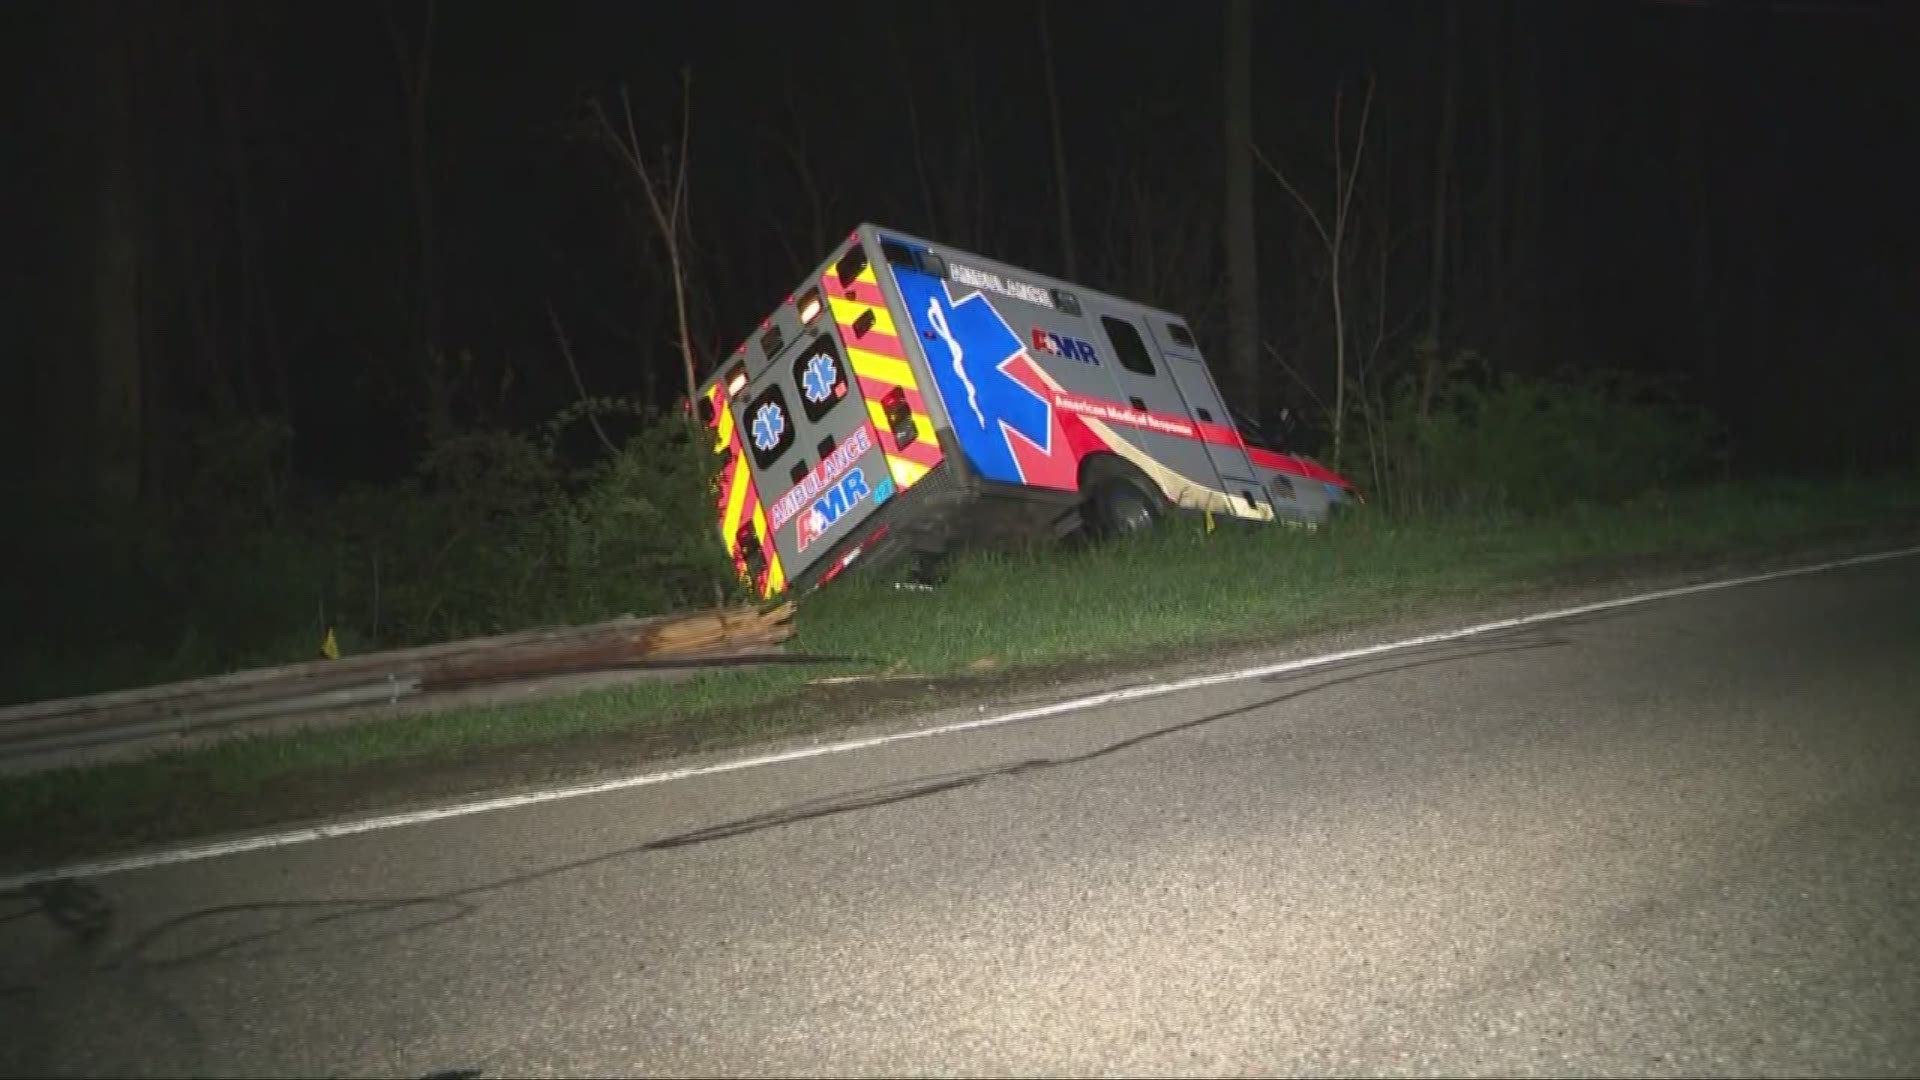 May 8, 2018: Akron police are searching for the person who stole an ambulance before crashing it early Tuesday morning. The ambulance slammed into a utility pole near the intersection of Merriman and Treaty Line roads.